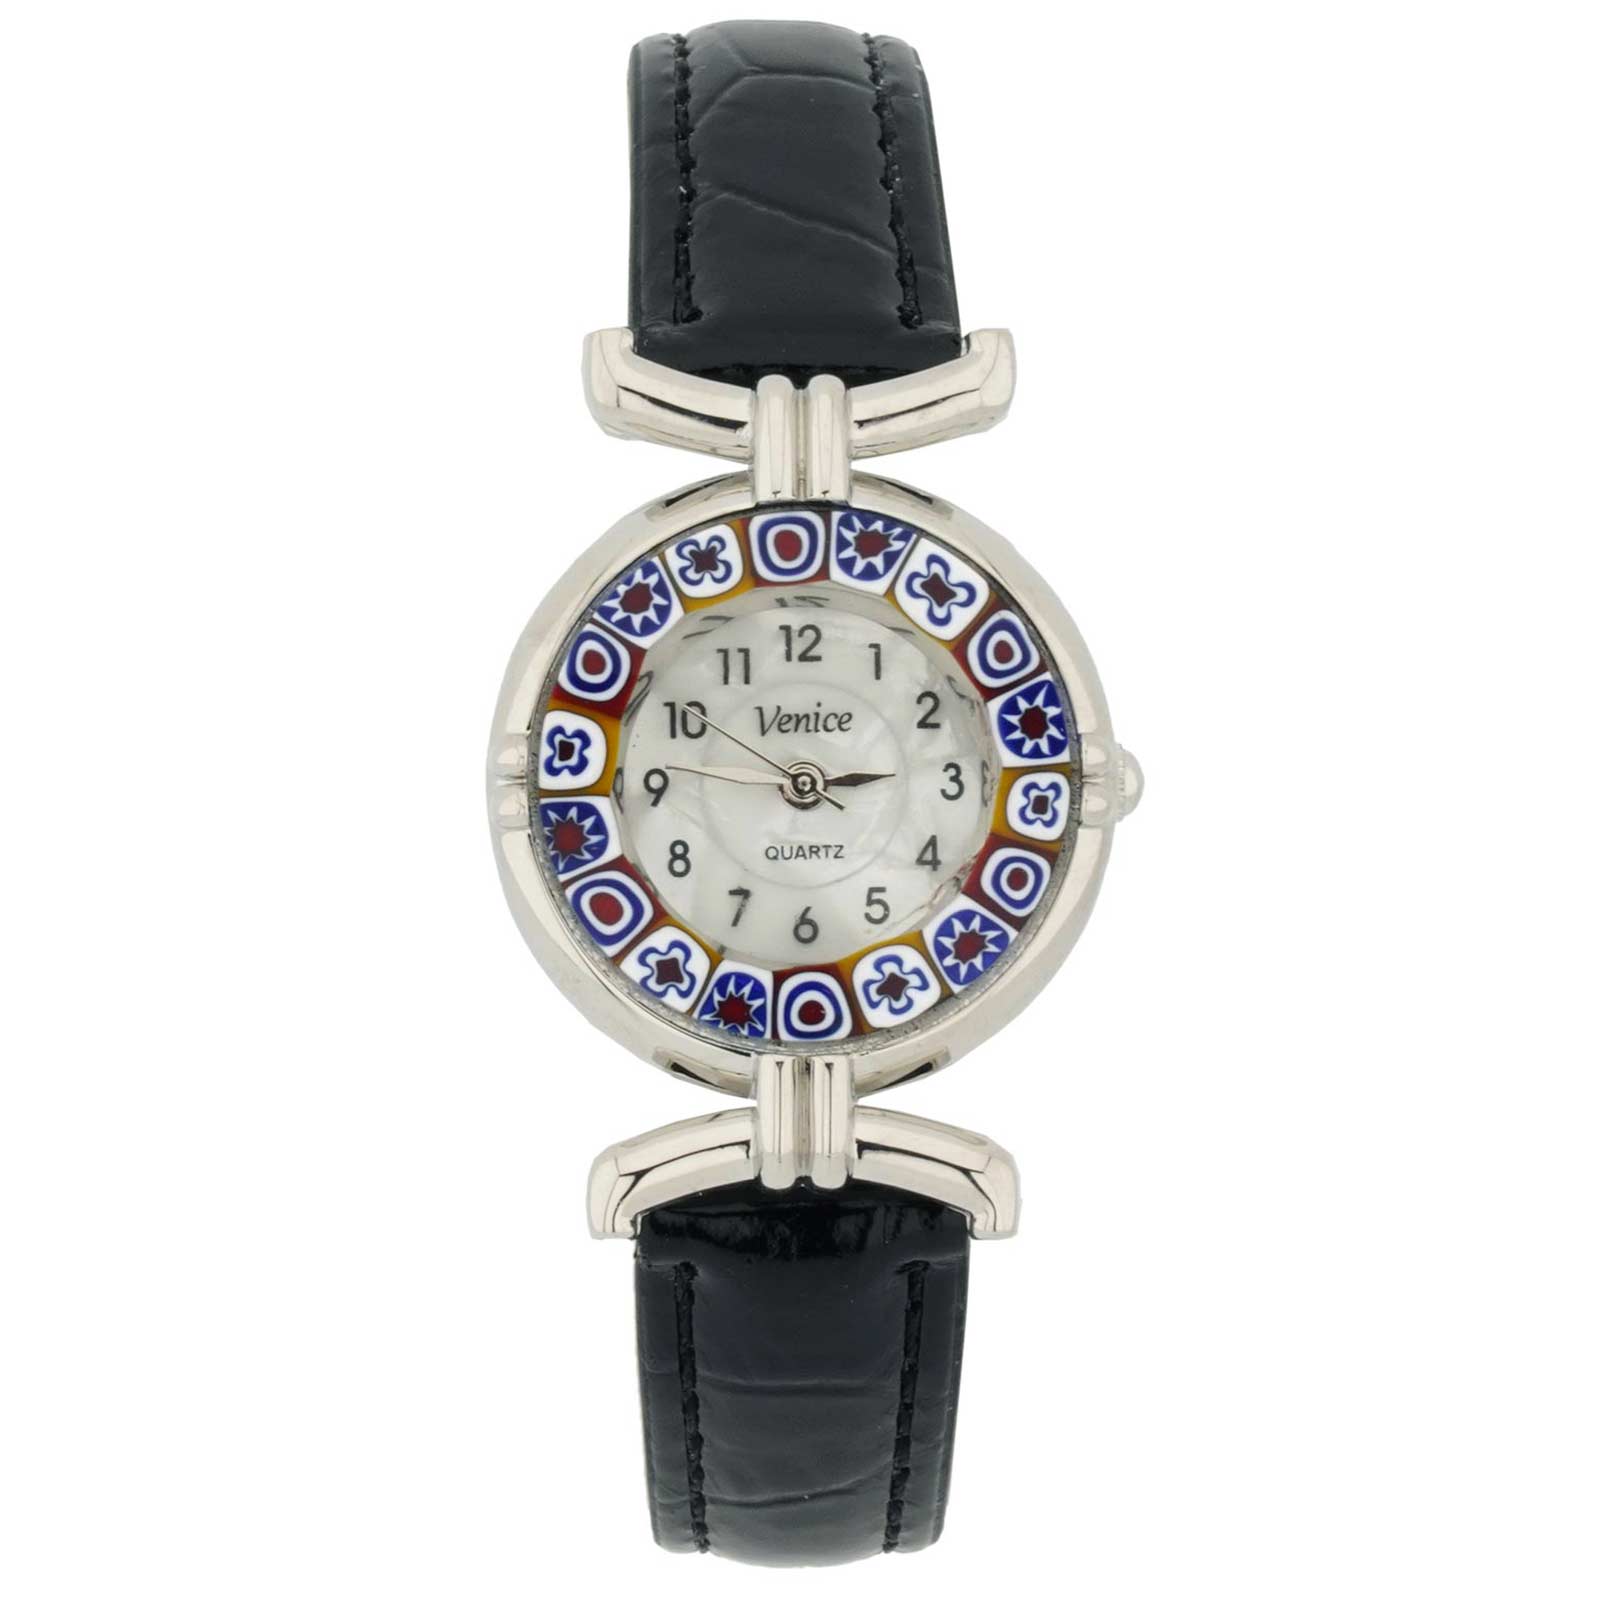 Murano Millefiori Watch With Leather Band - Black